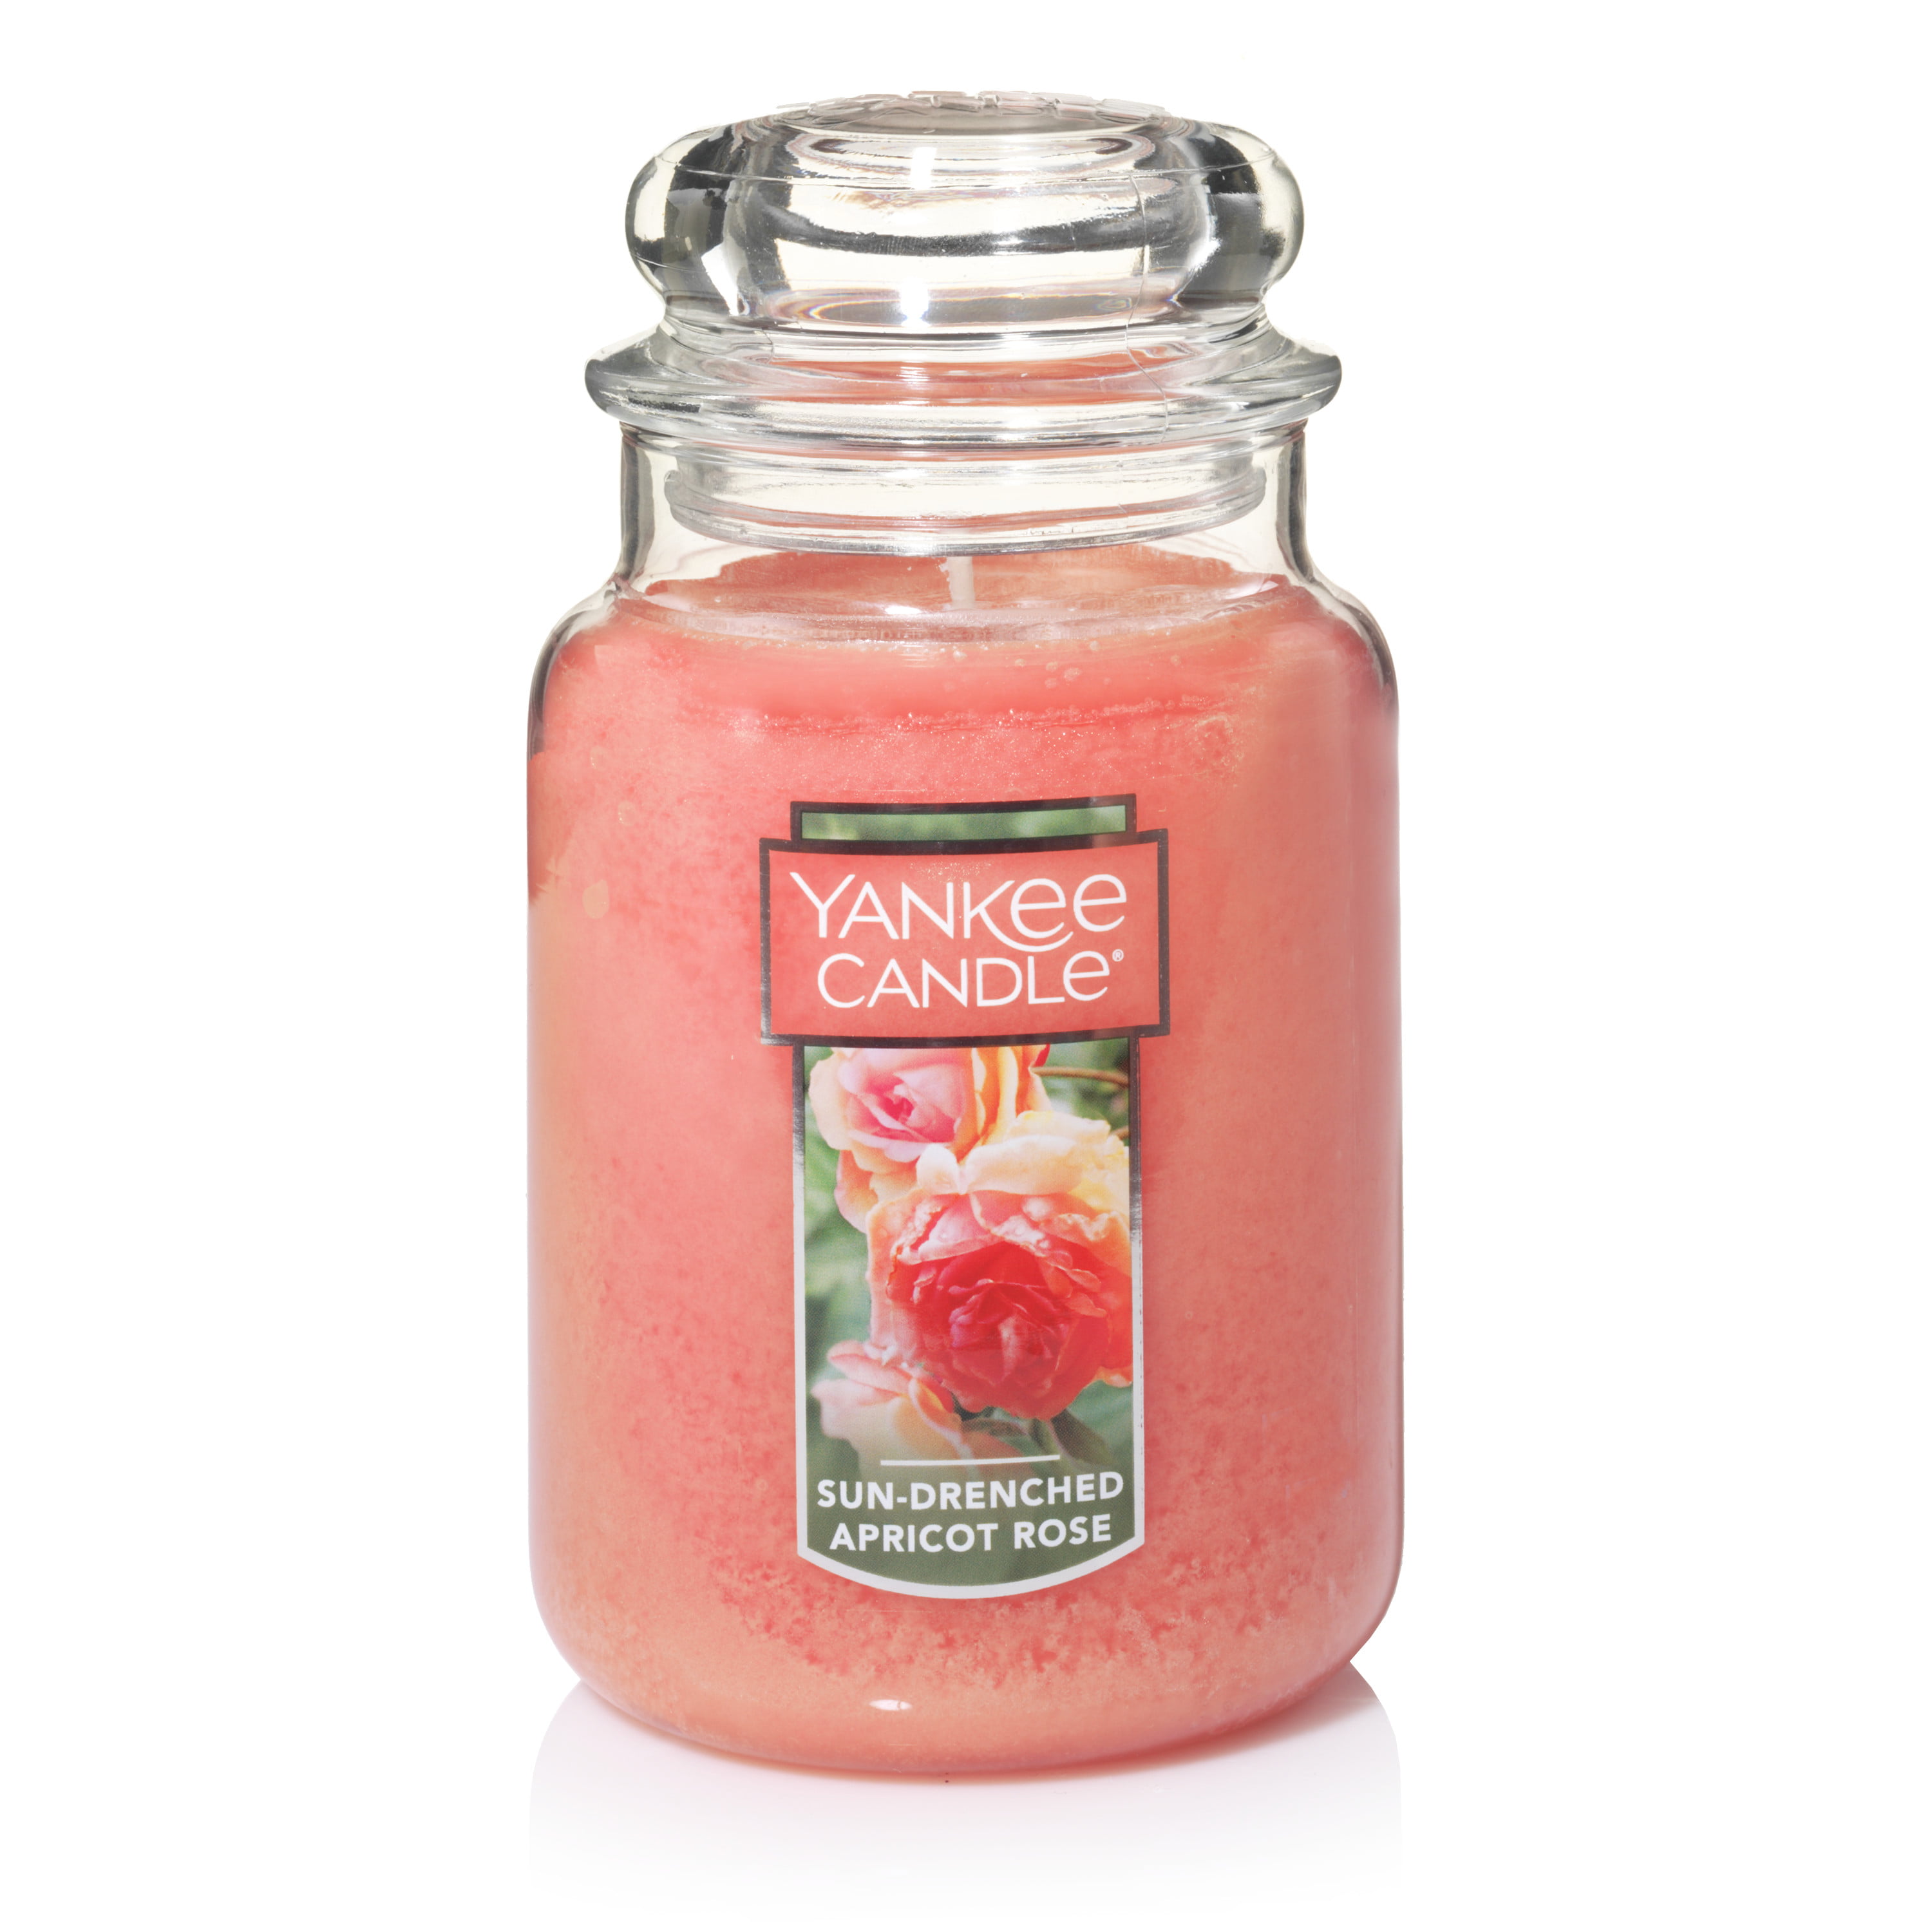 Yankee Candle Sun-Drenched Apricot Rose - Large Classic Jar Candle